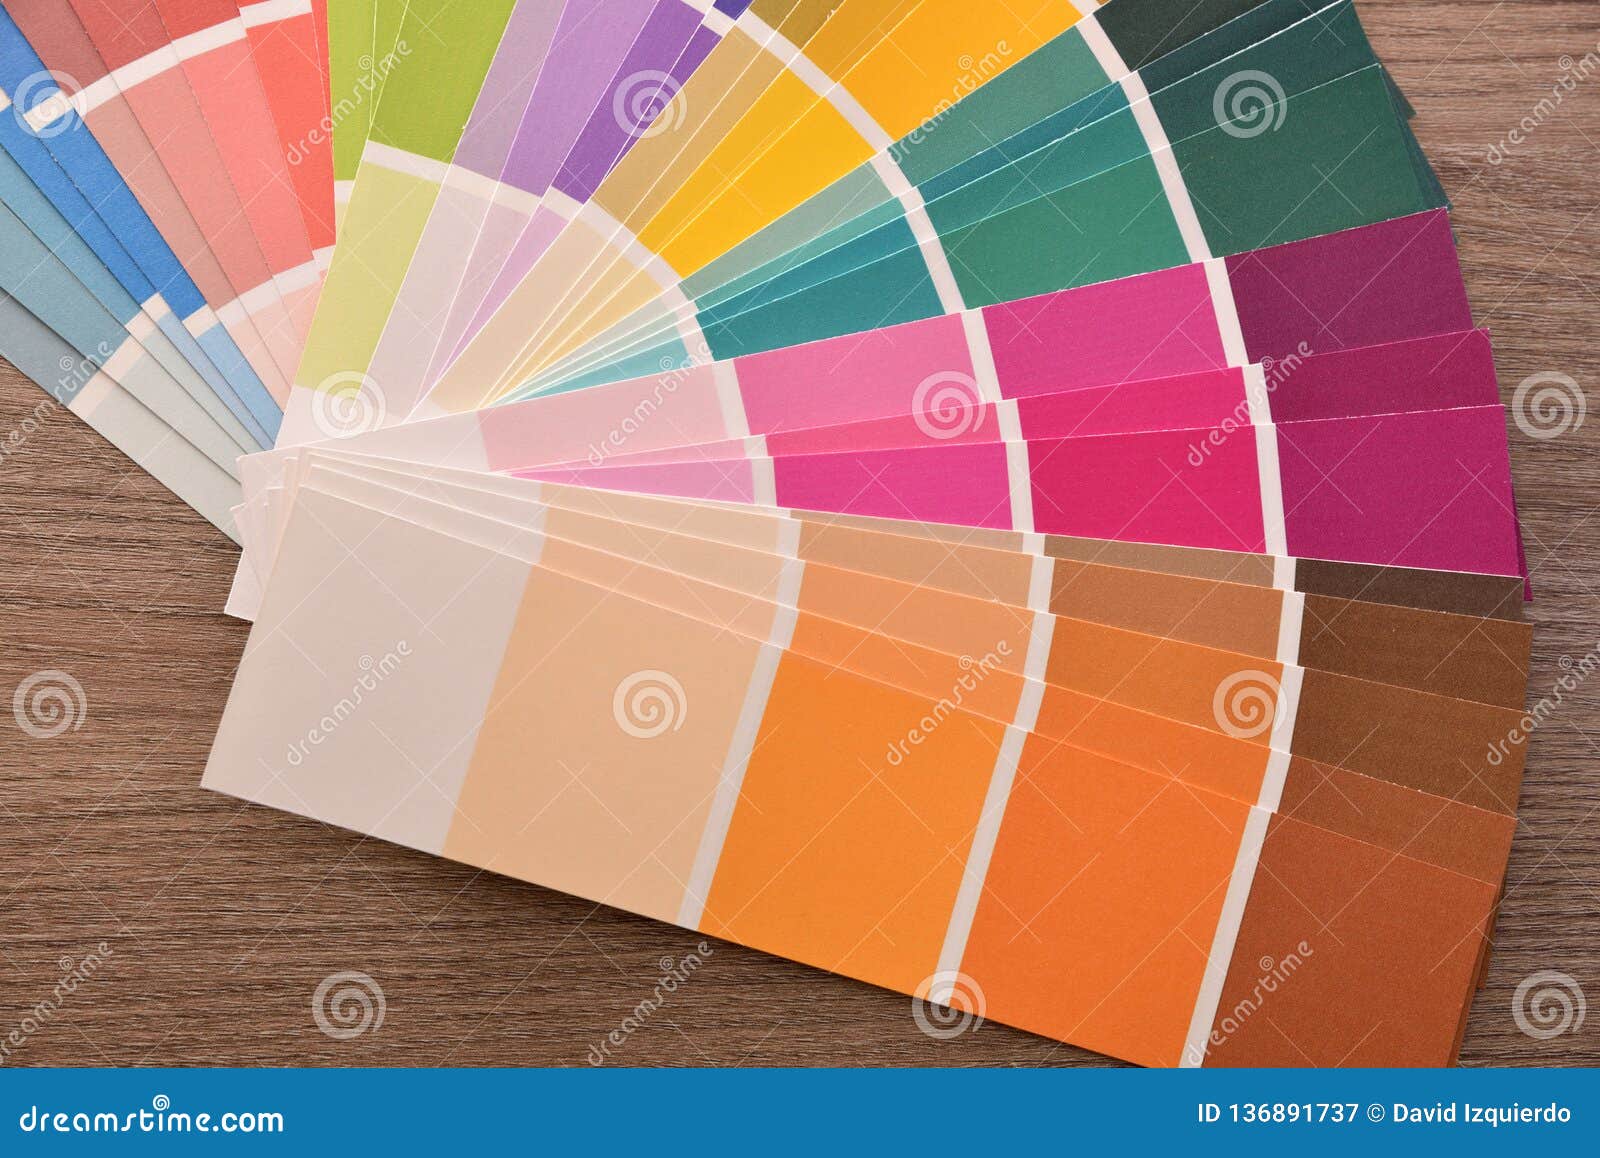 colour palette in fan on wooden table close up top